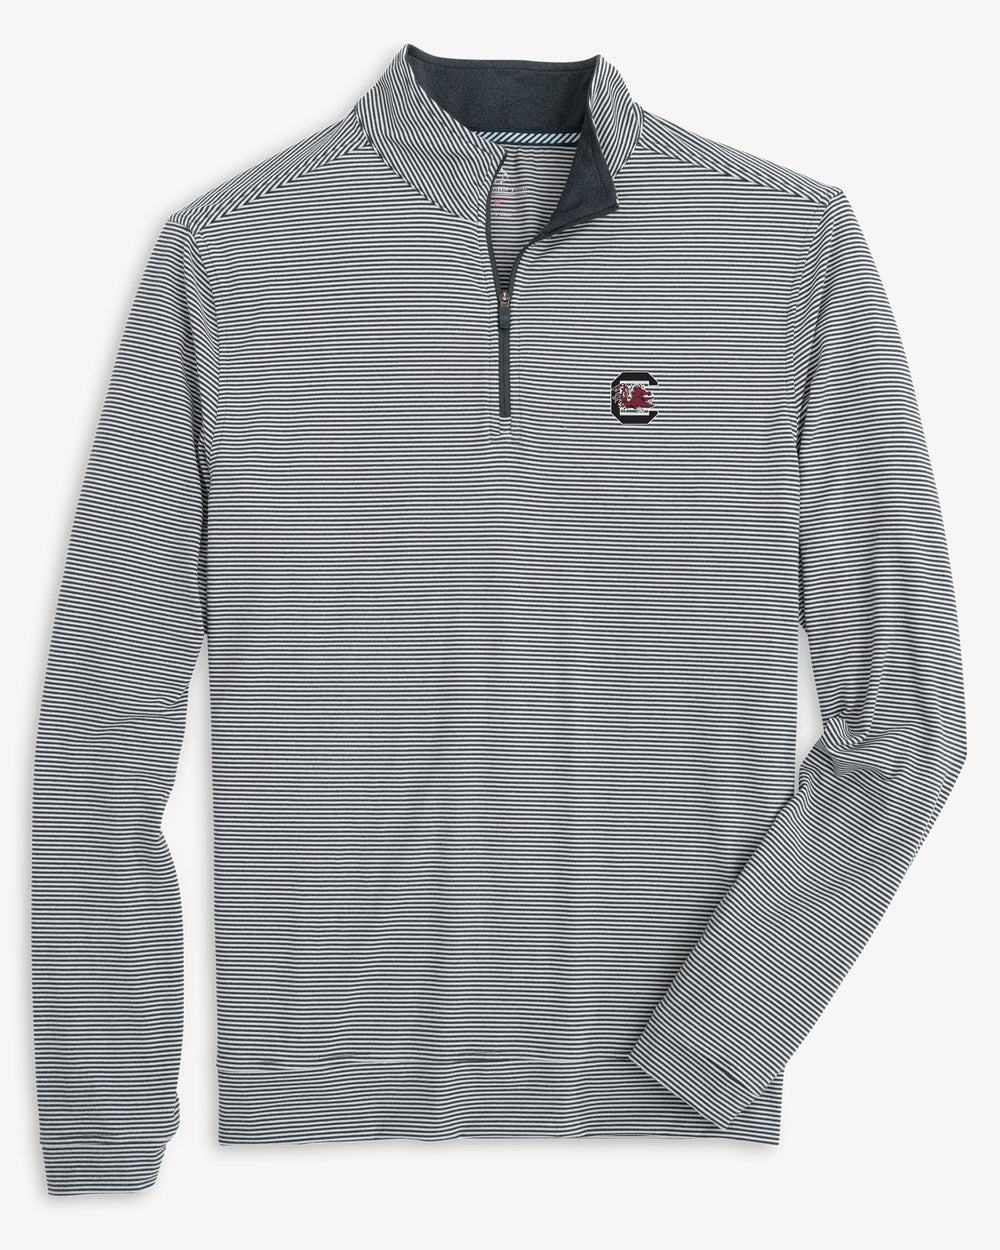 The front view of the USC Gamecocks Cruiser Micro-Stripe Heather Quarter Zip by Southern Tide - Heather Black